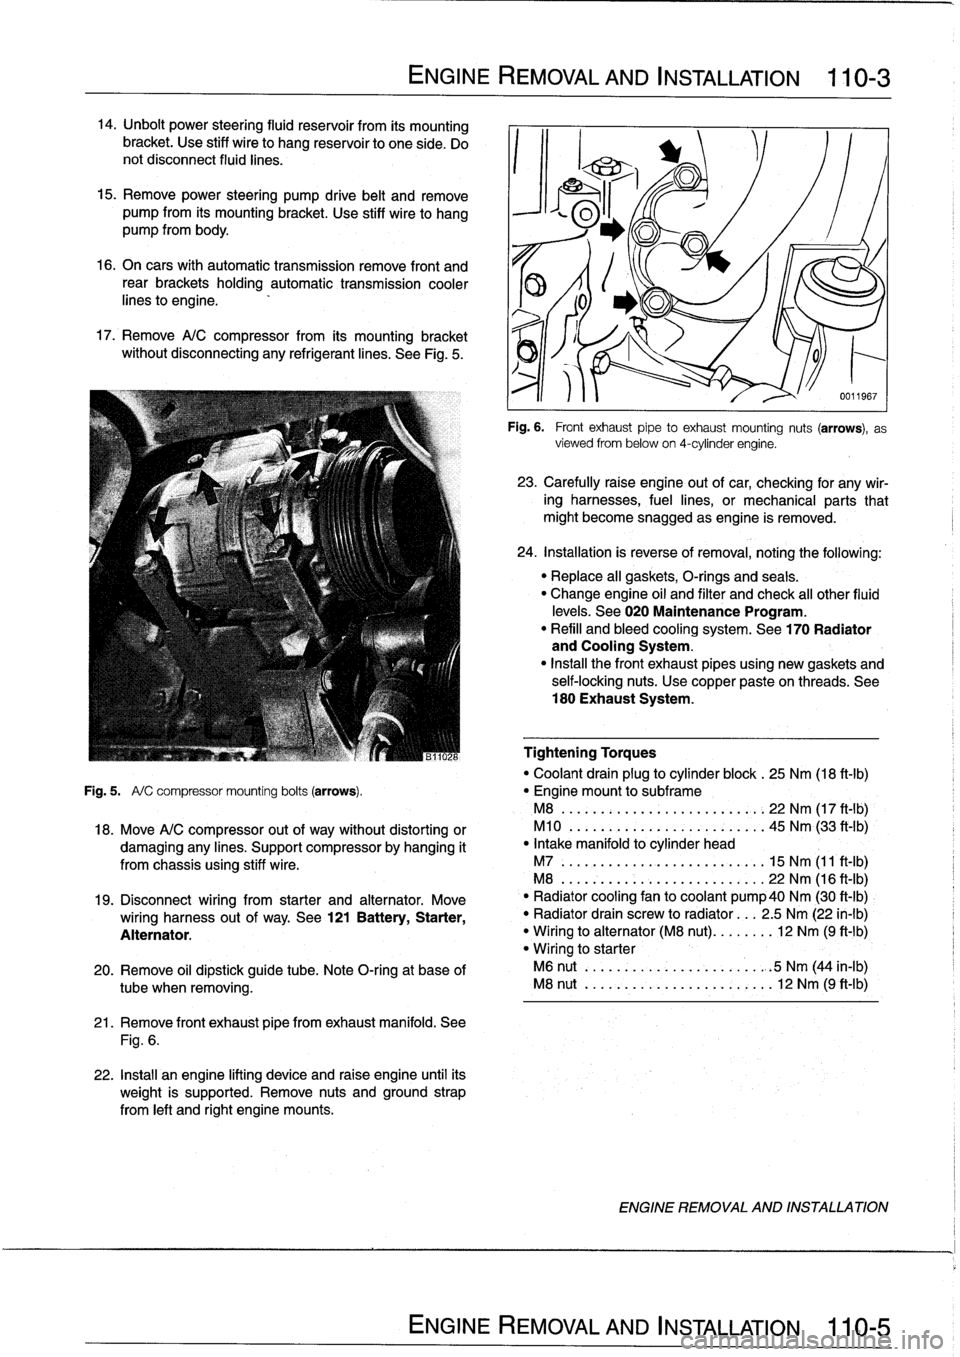 BMW 318i 1997 E36 Workshop Manual 14
.
Unbolt
power
steering
fluid
reservoir
from
íts
mounting
bracket
.
Use
stiff
wire
to
hang
reservoir
to
one
side
.
Do
not
disconnect
fluid
lines
.

15
.
Remove
power
steering
pump
drive
belt
and
r